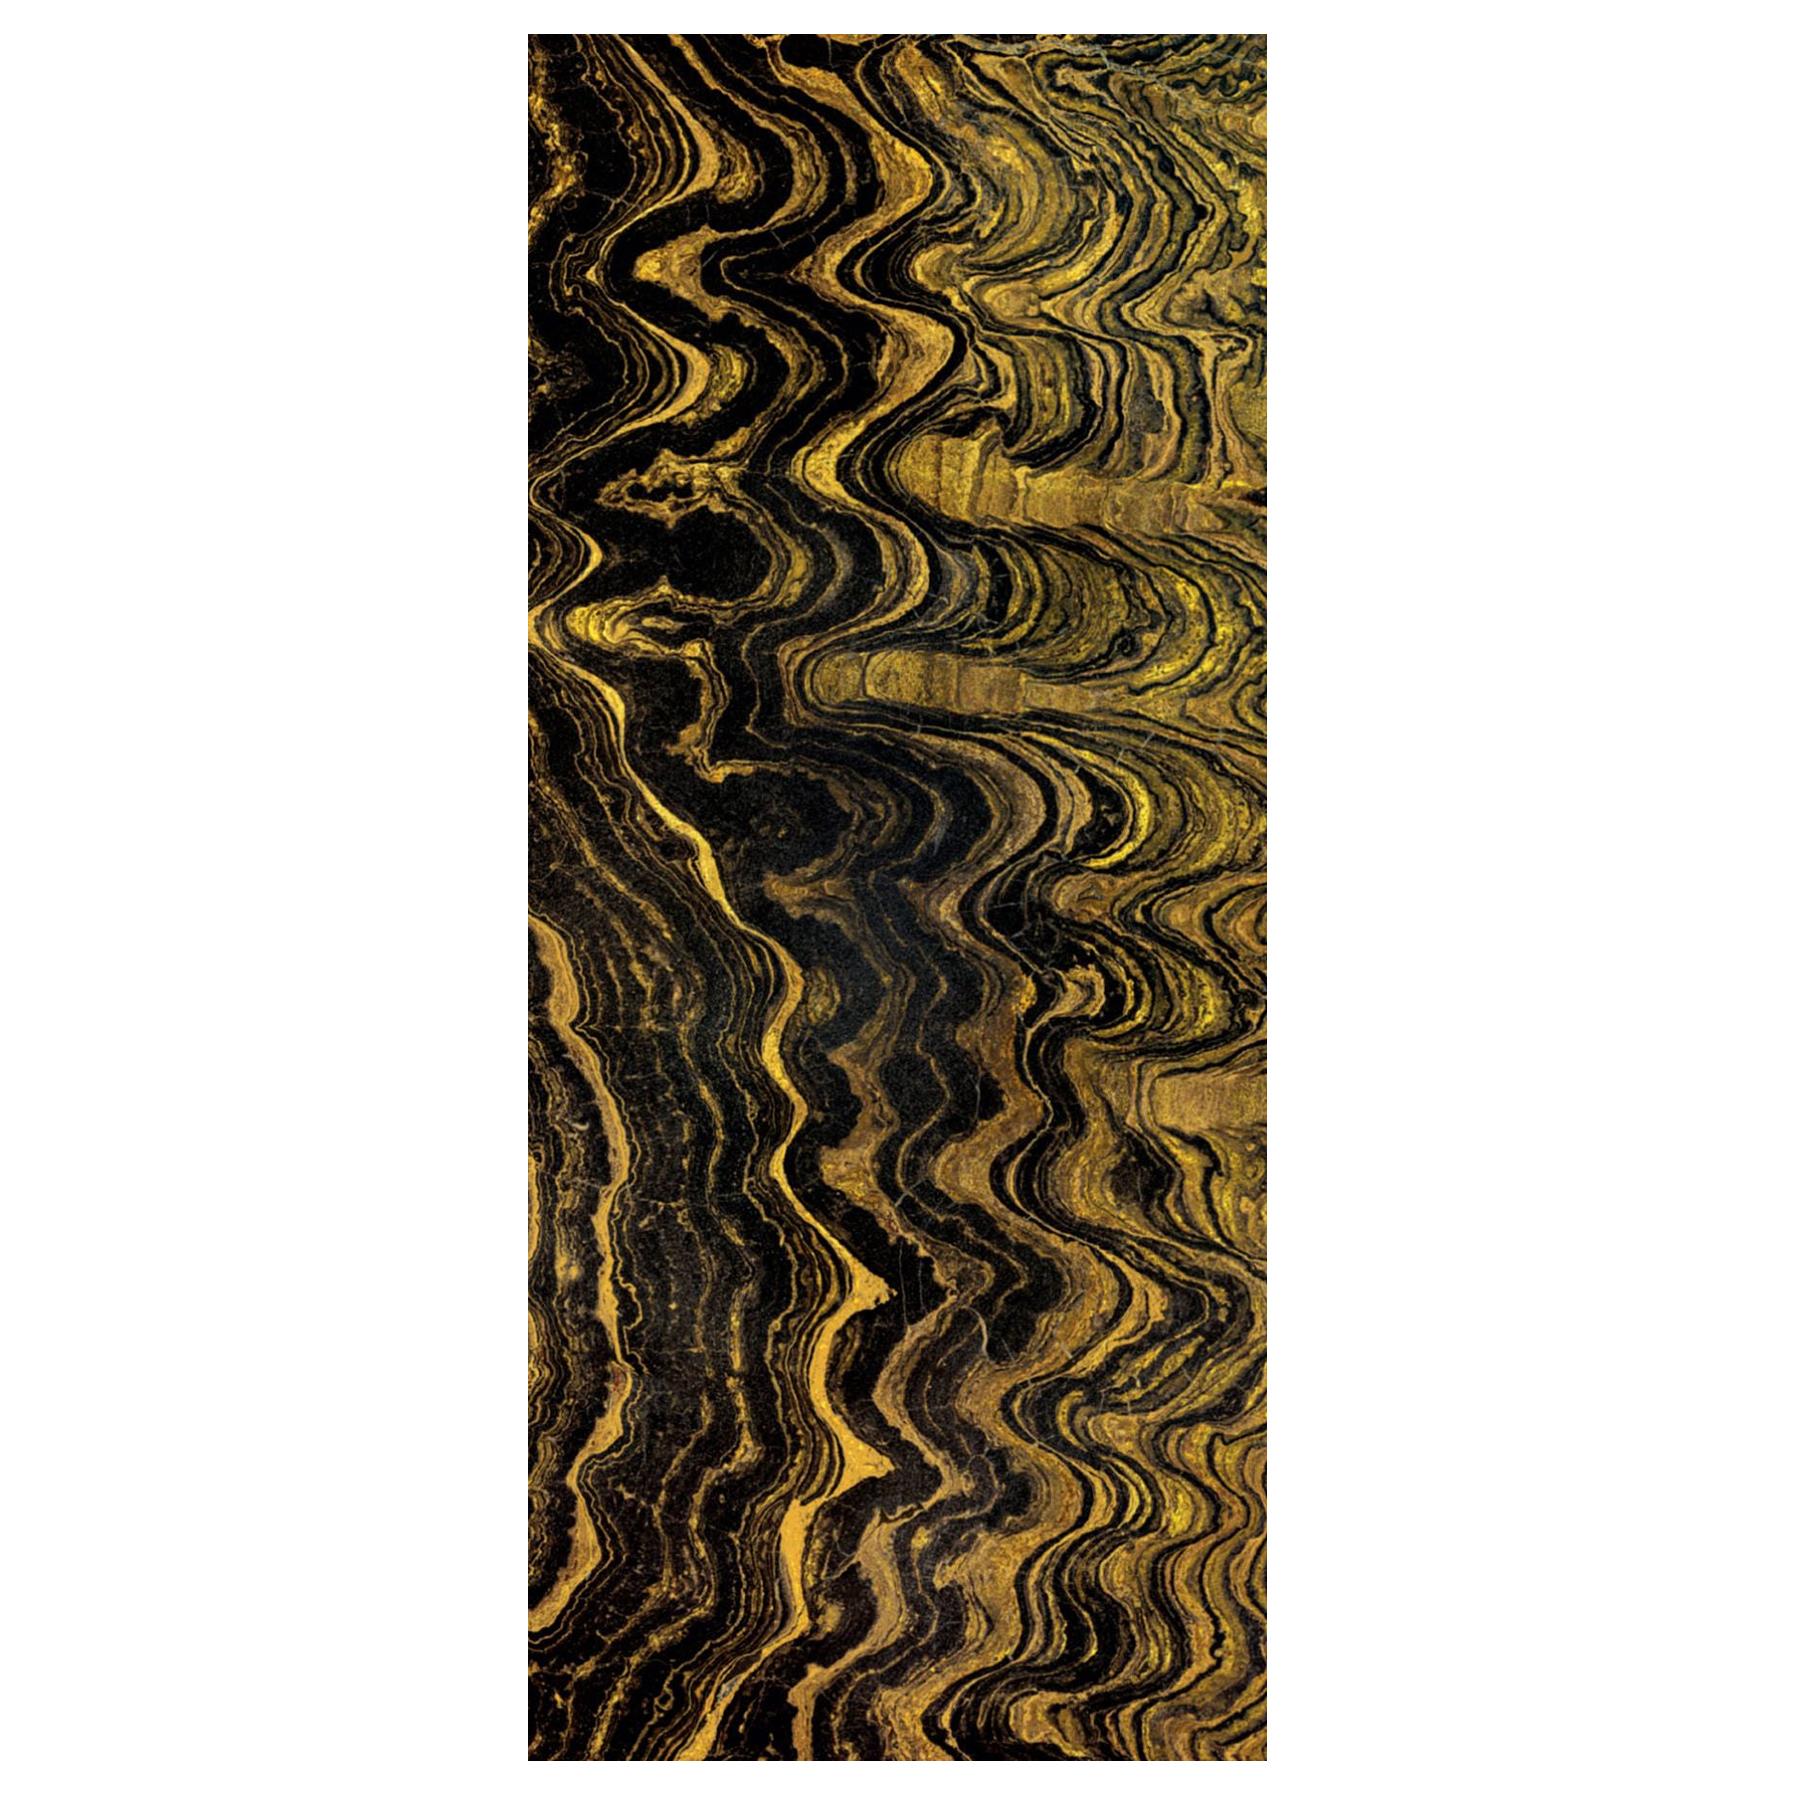 Art Glass Waves Decorative Panel for Multiple Uses Dimension Customizable